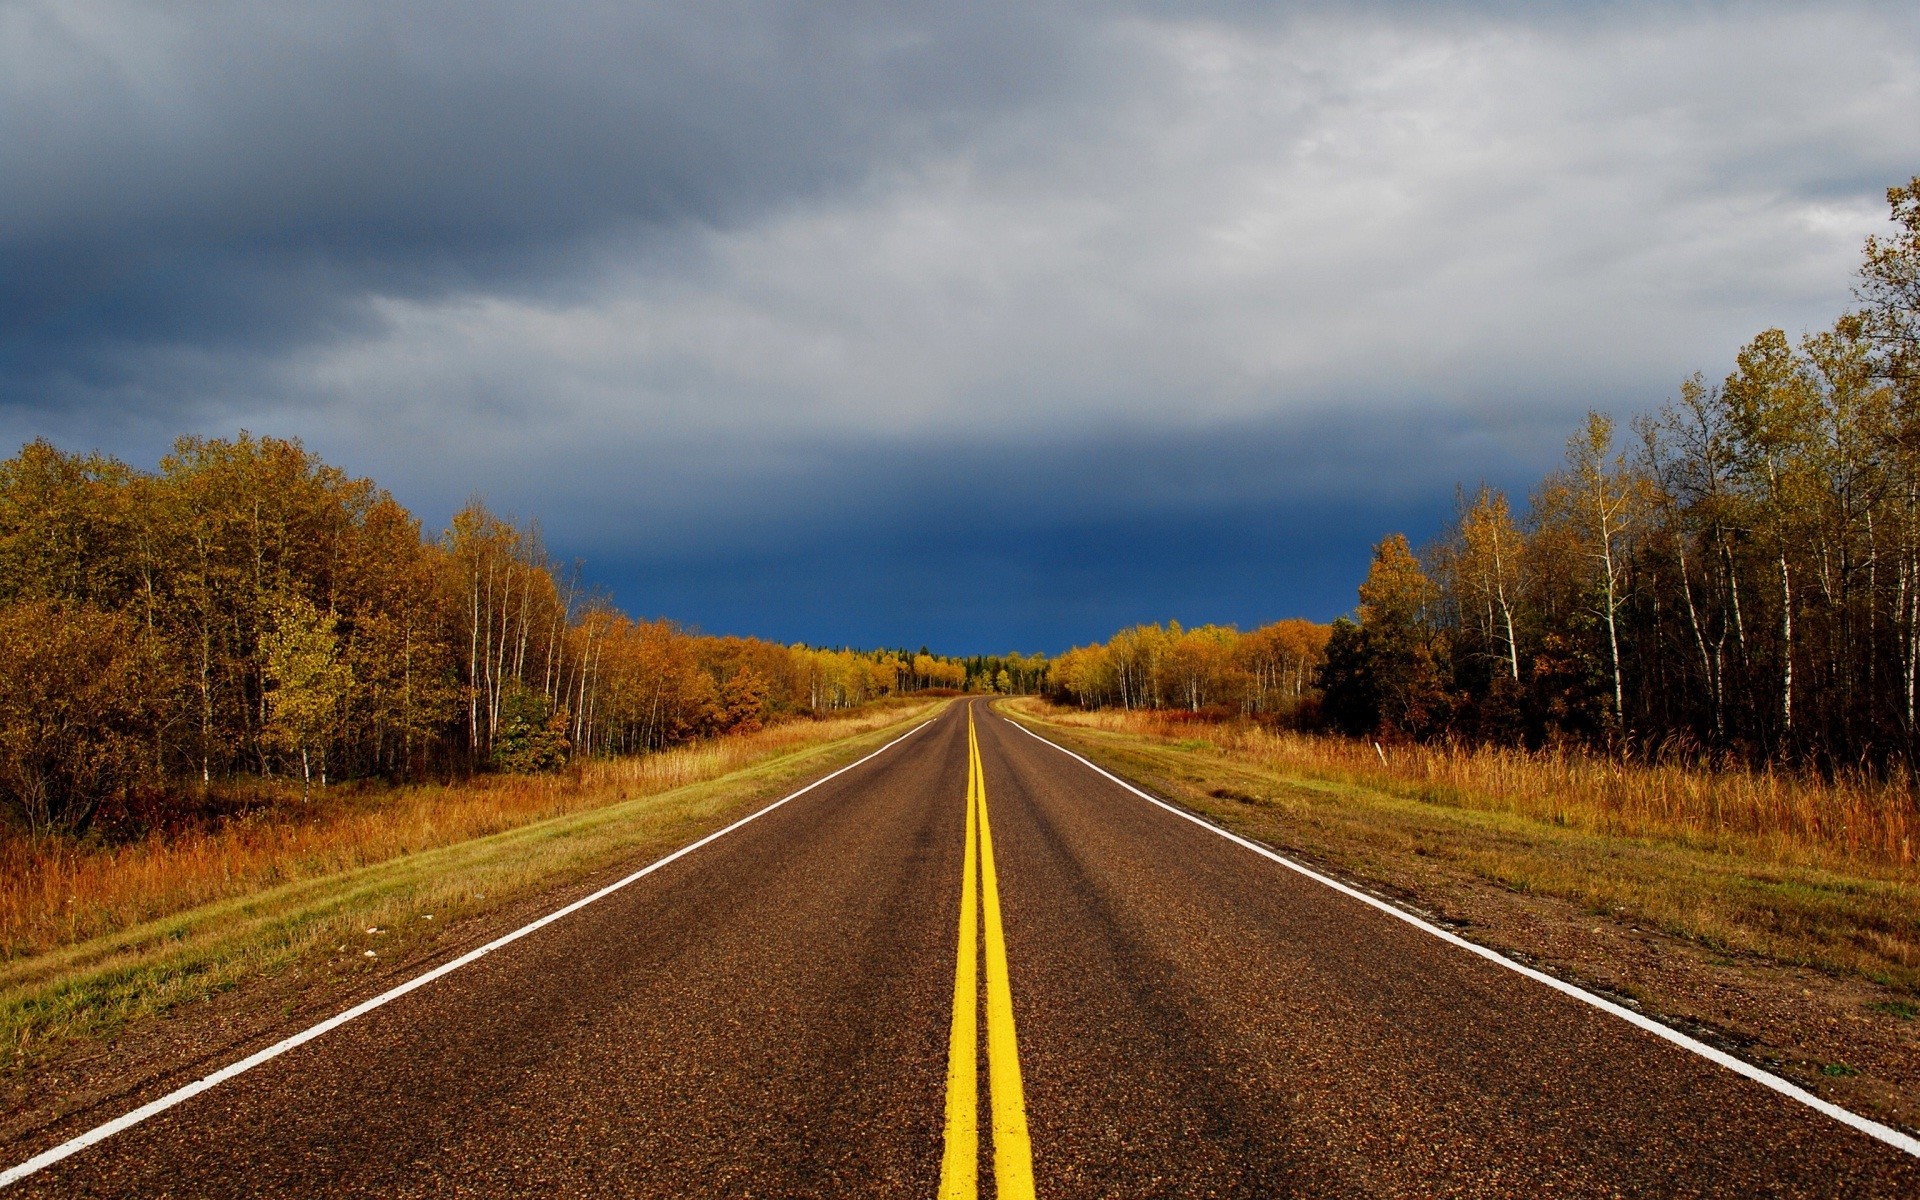 The road awesome real 4k hd wallpapers